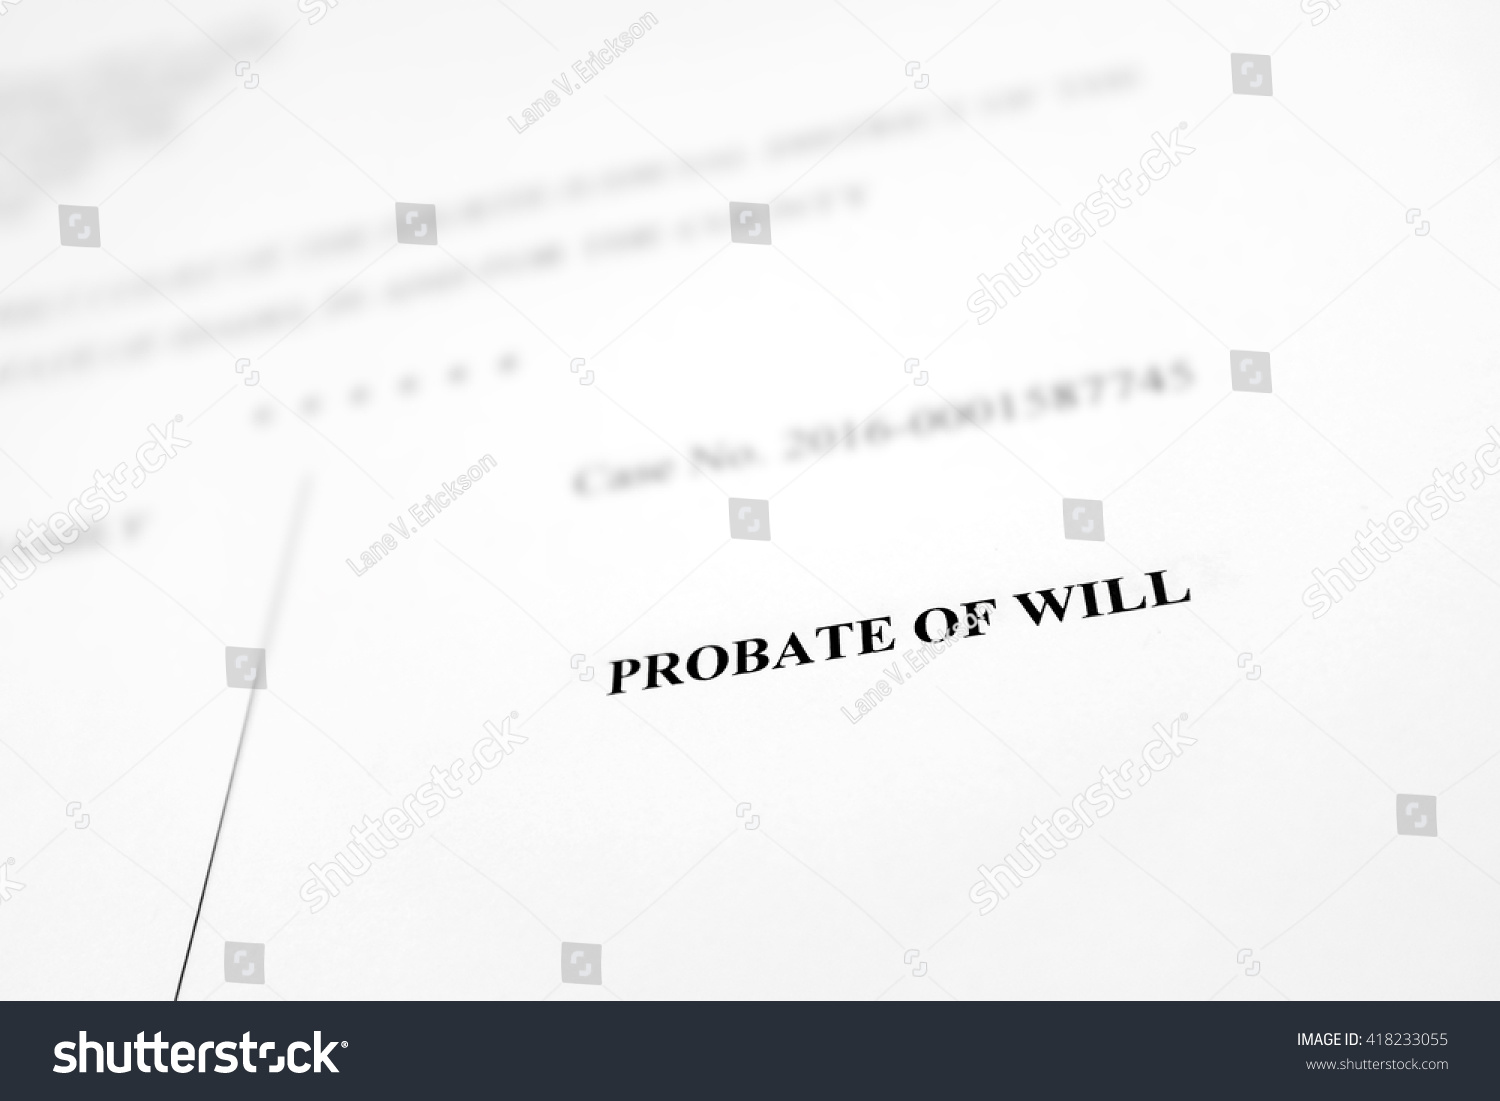 We assist with all probate, estate, deceased, death, named beneficiaries, property, courts, and law offices.